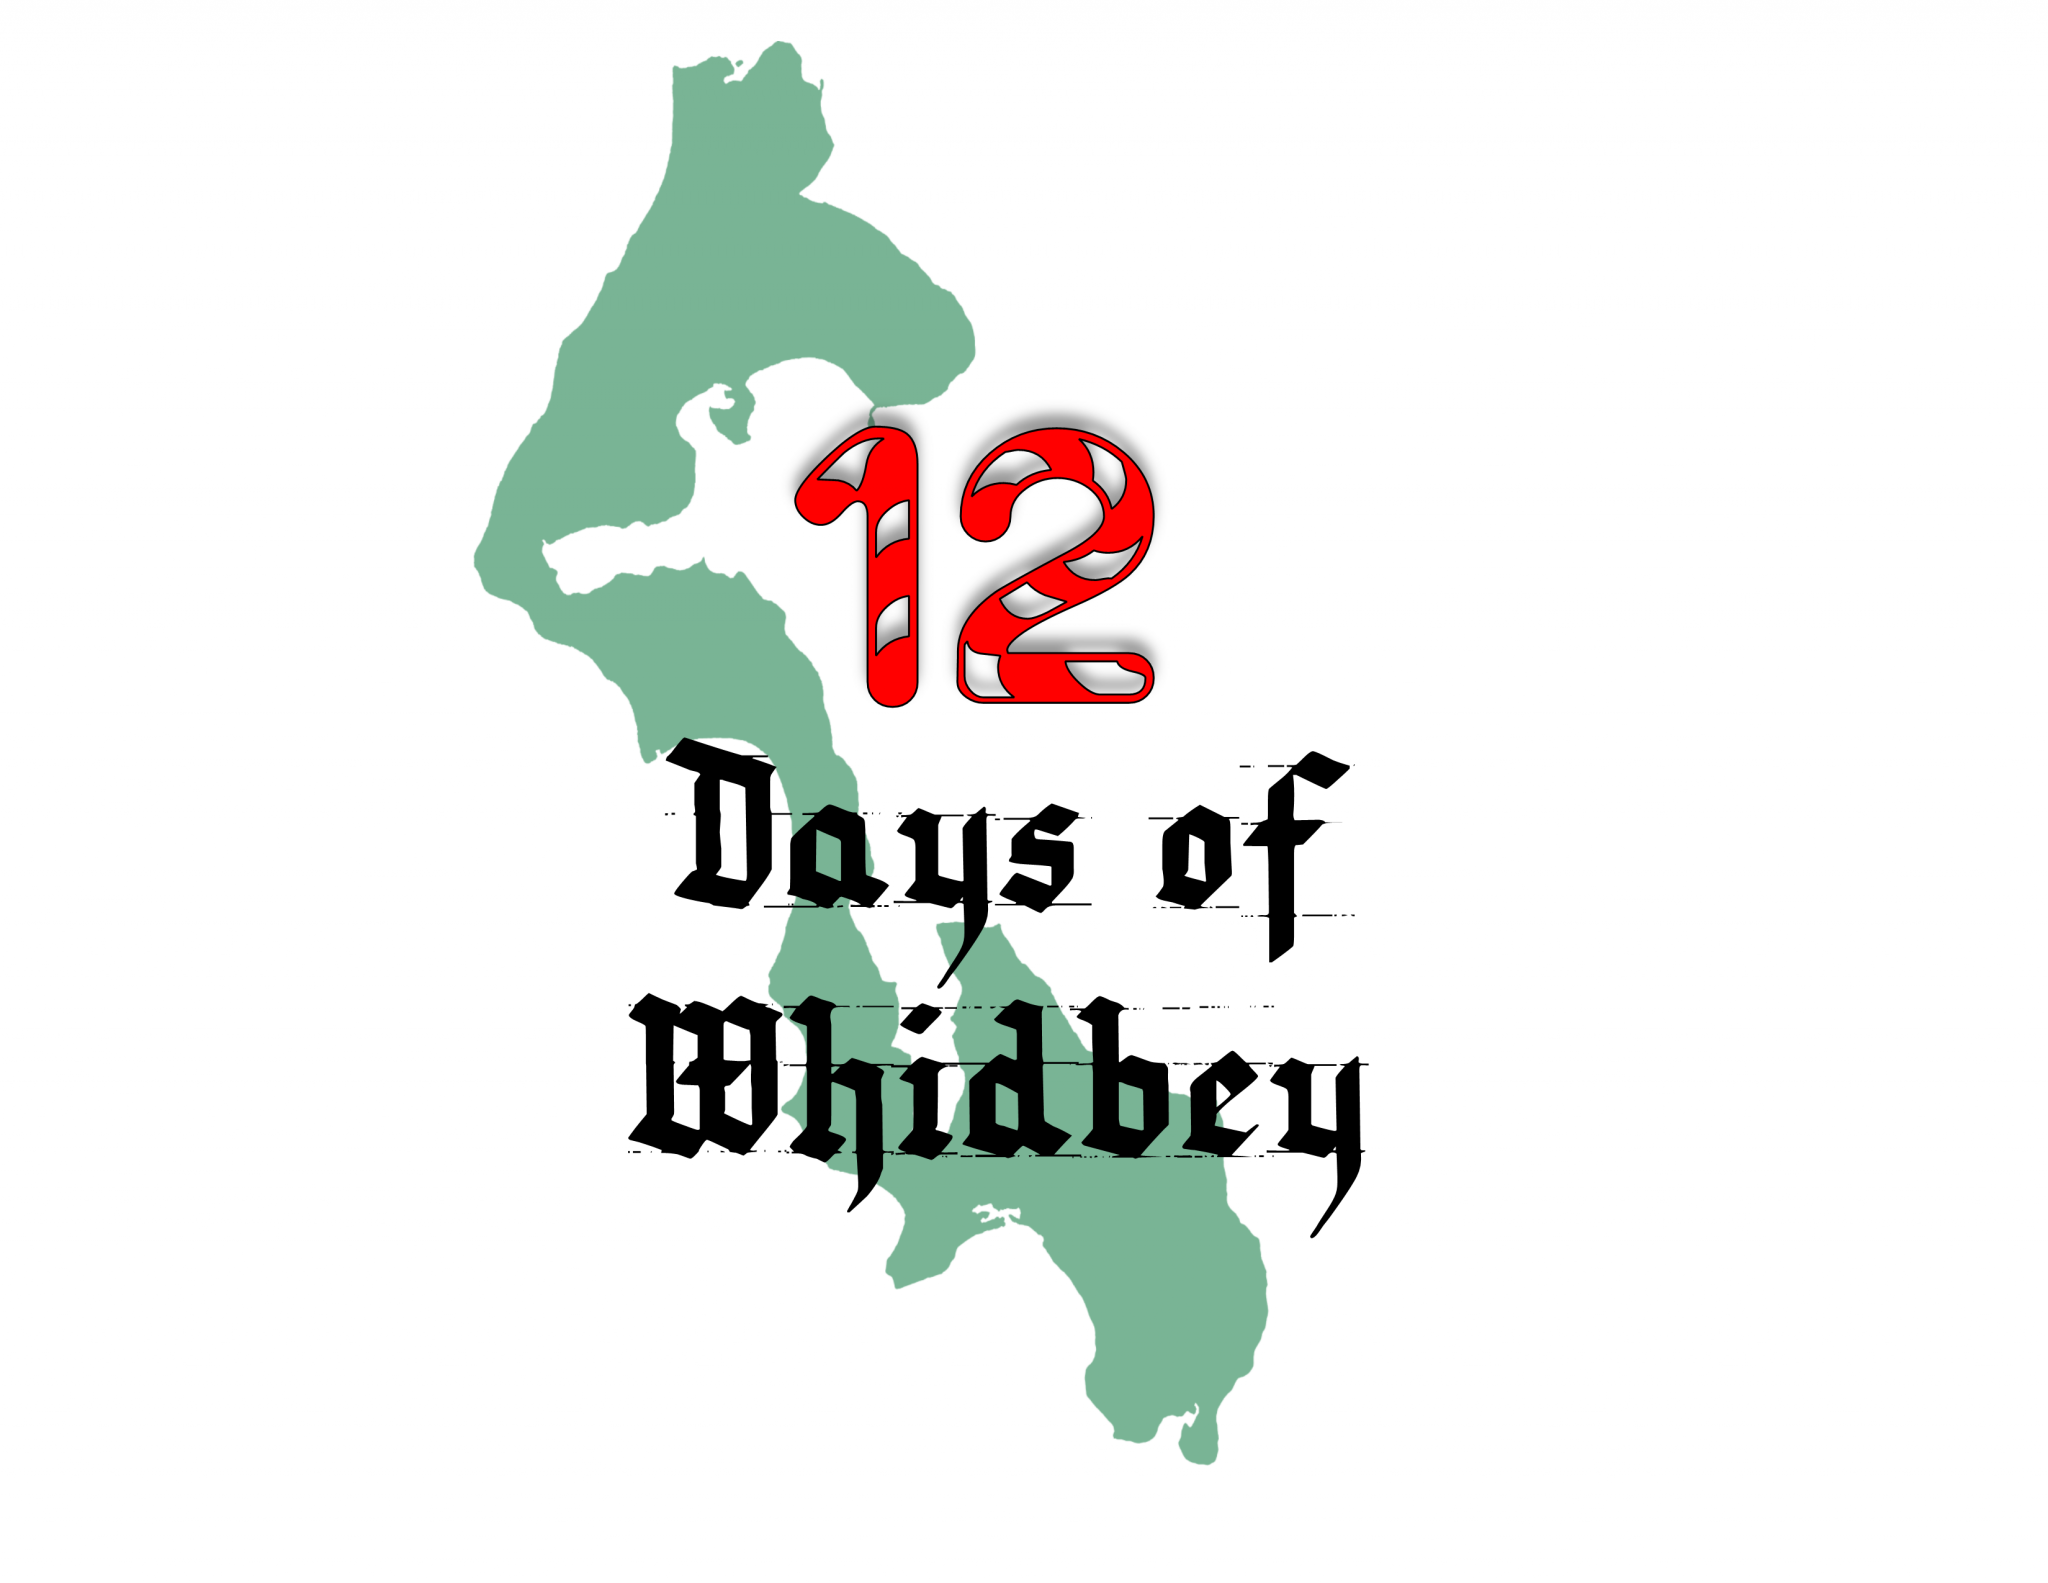 12 days of whidbey